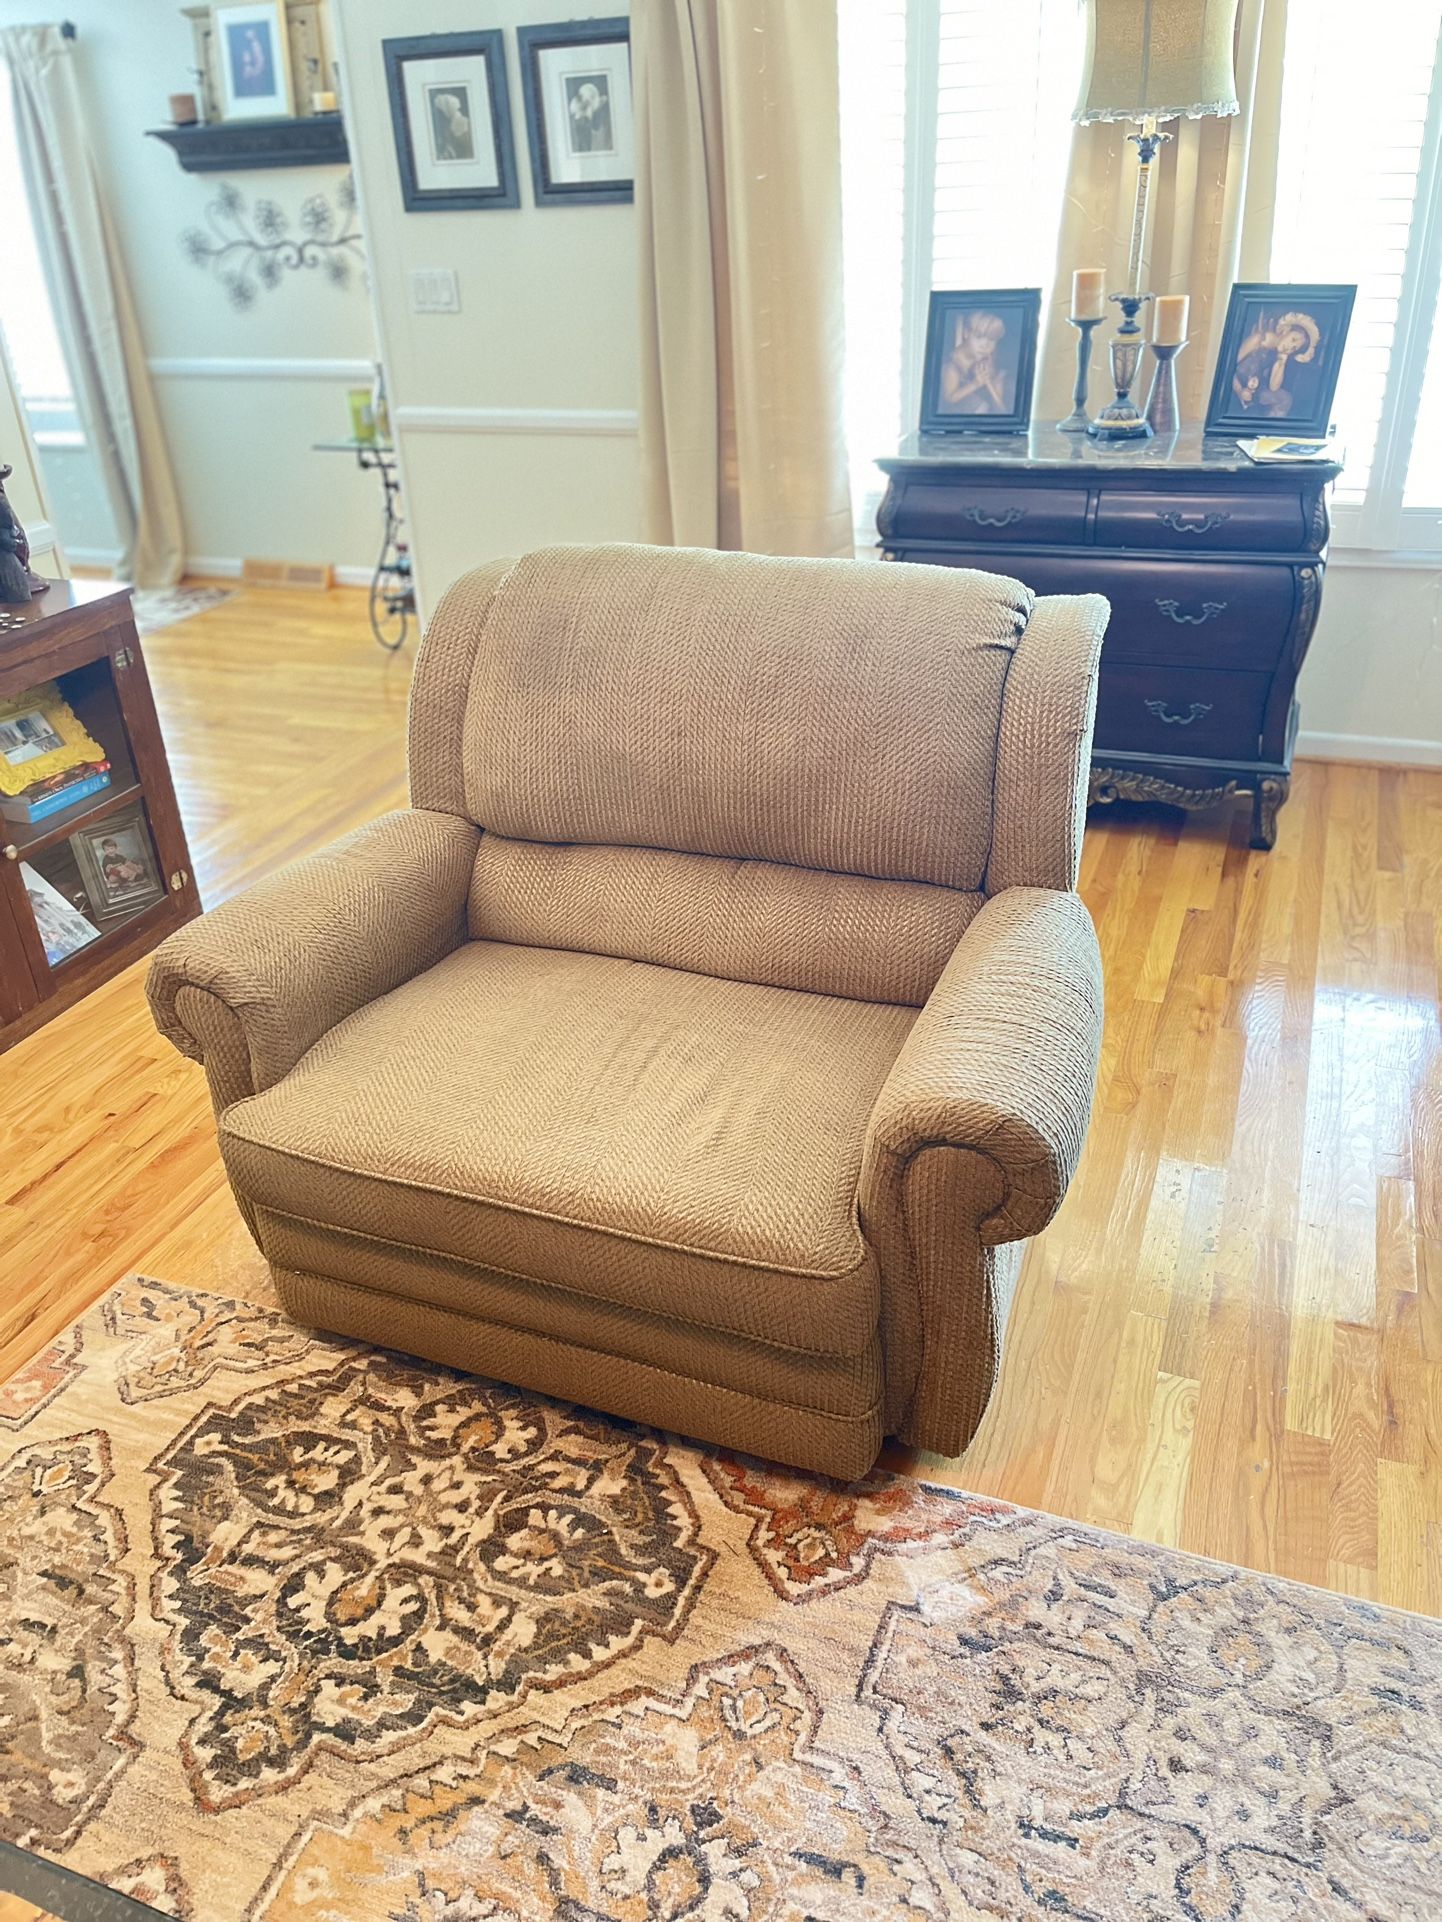 Oversized Chair/Recliner